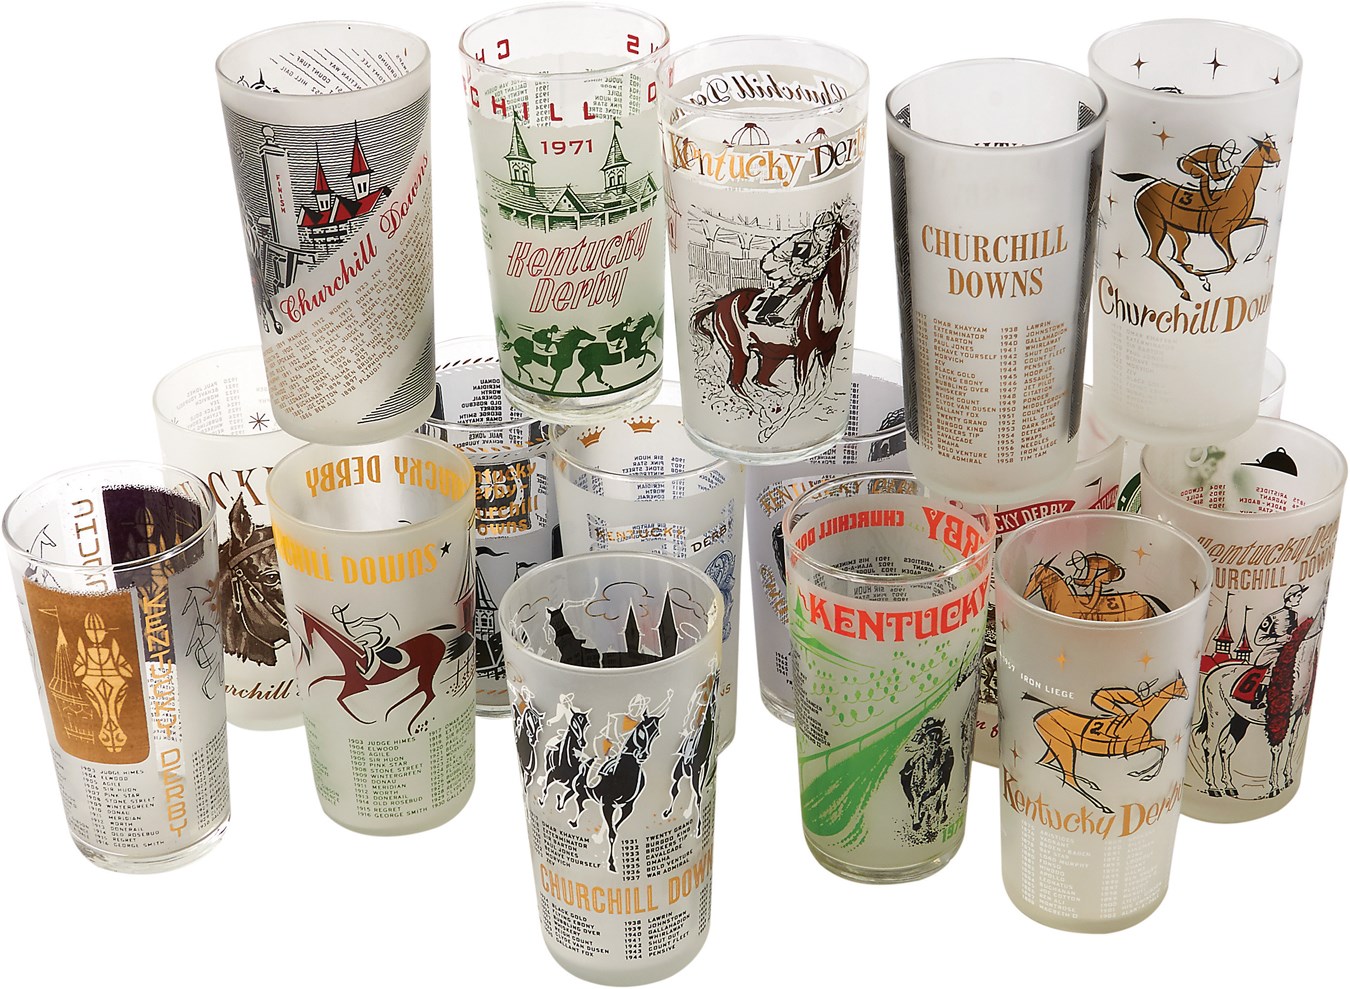 Horse Racing - 1945-2016 Complete Run of Kentucky Derby Glasses (74) (Excluding only the 1947 blank partially frosted glass)